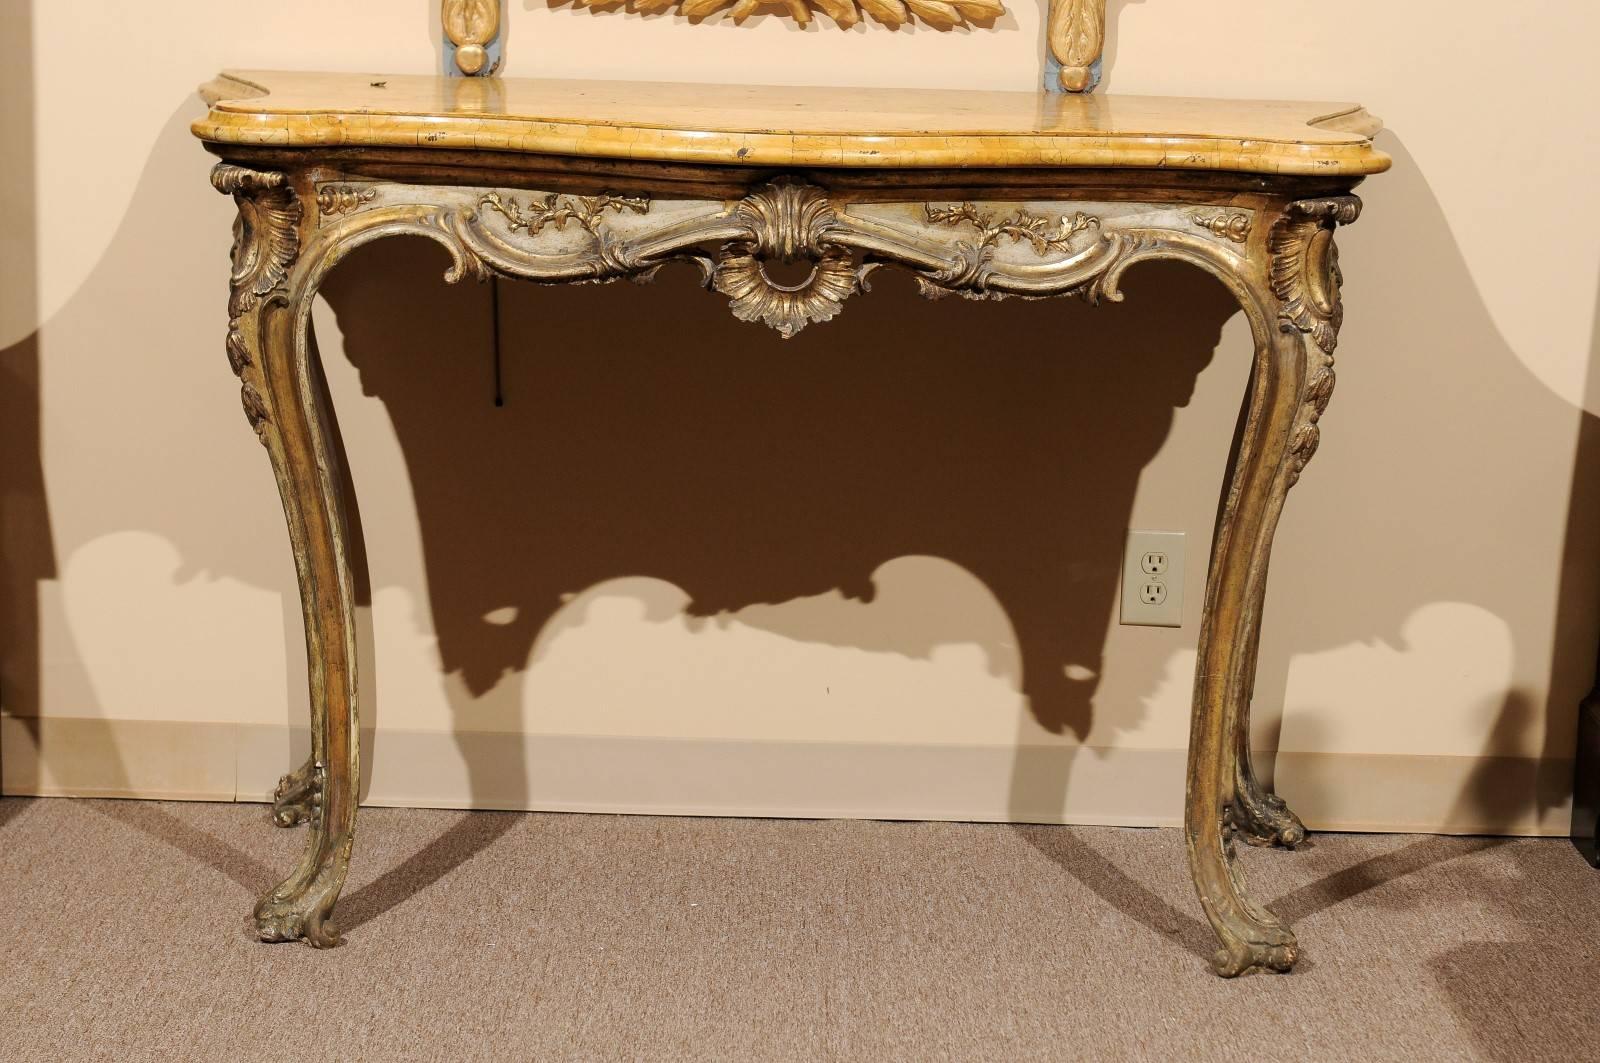 Large Italian silvered Rococo console with sienna marble top with serpentine form, carved frieze with pierced shell, acanthus leaf detail and cabriole legs. 

William Word fine Antiques: Atlanta's source for antique interiors since 1956. 

 